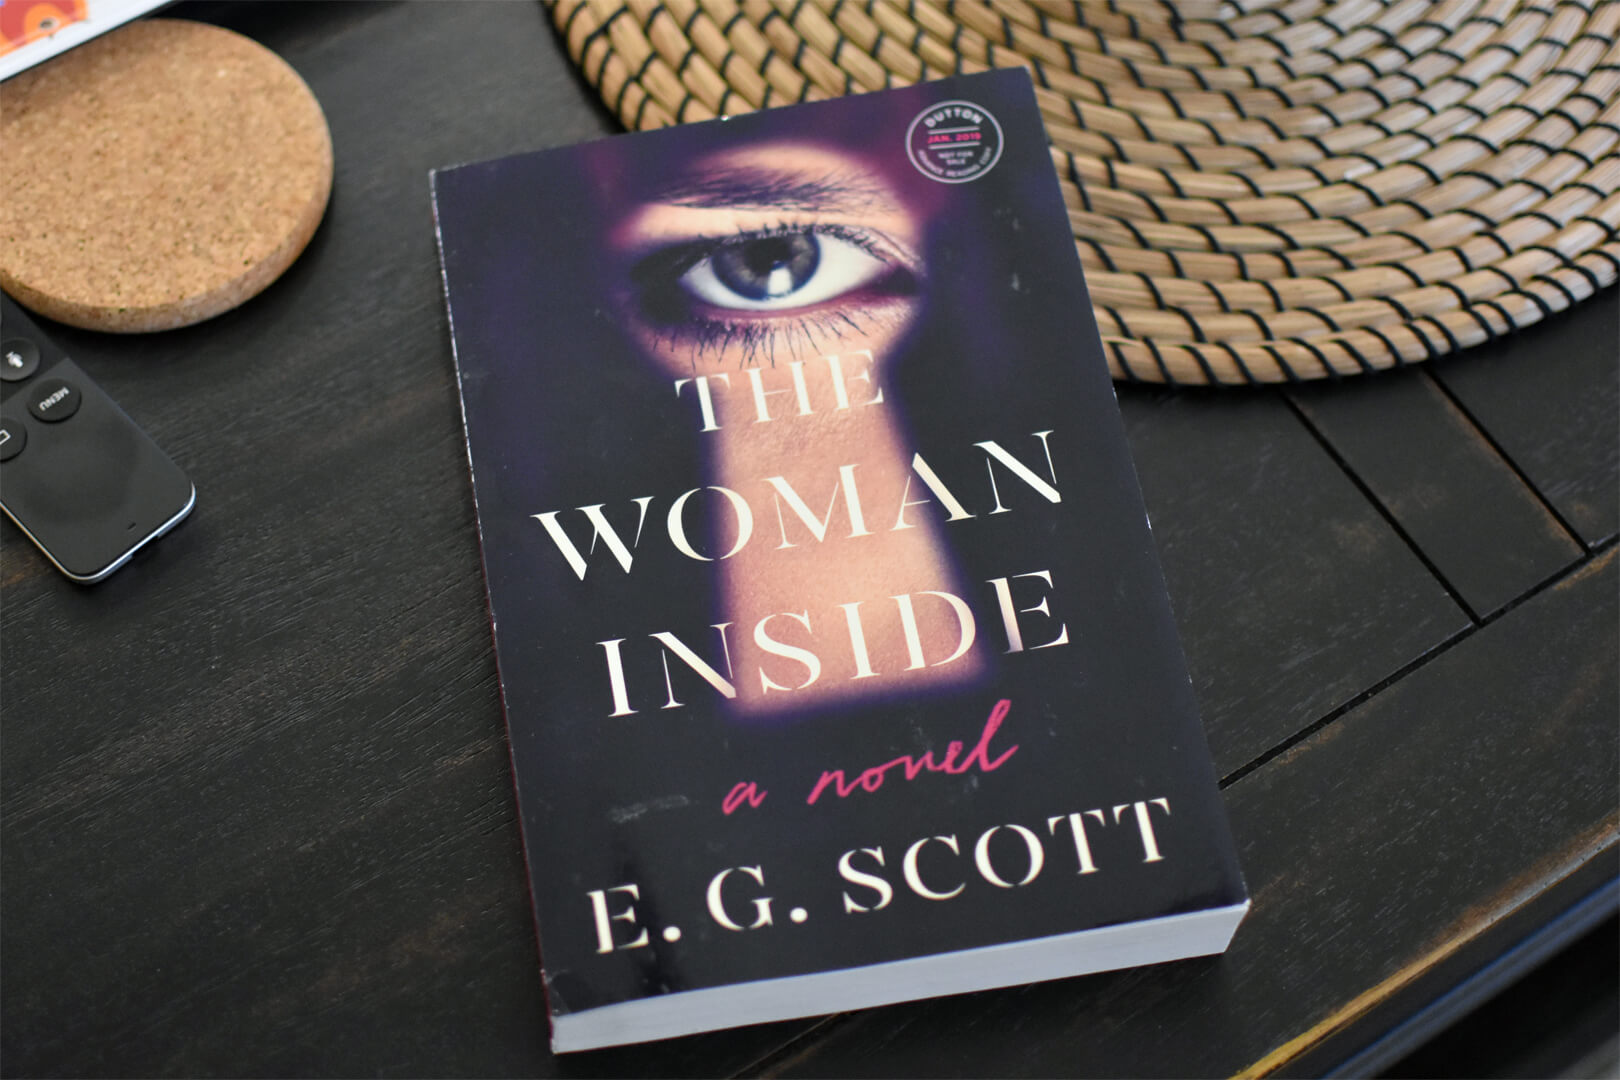 Book Club Questions for The Woman Inside by E.G. Scott